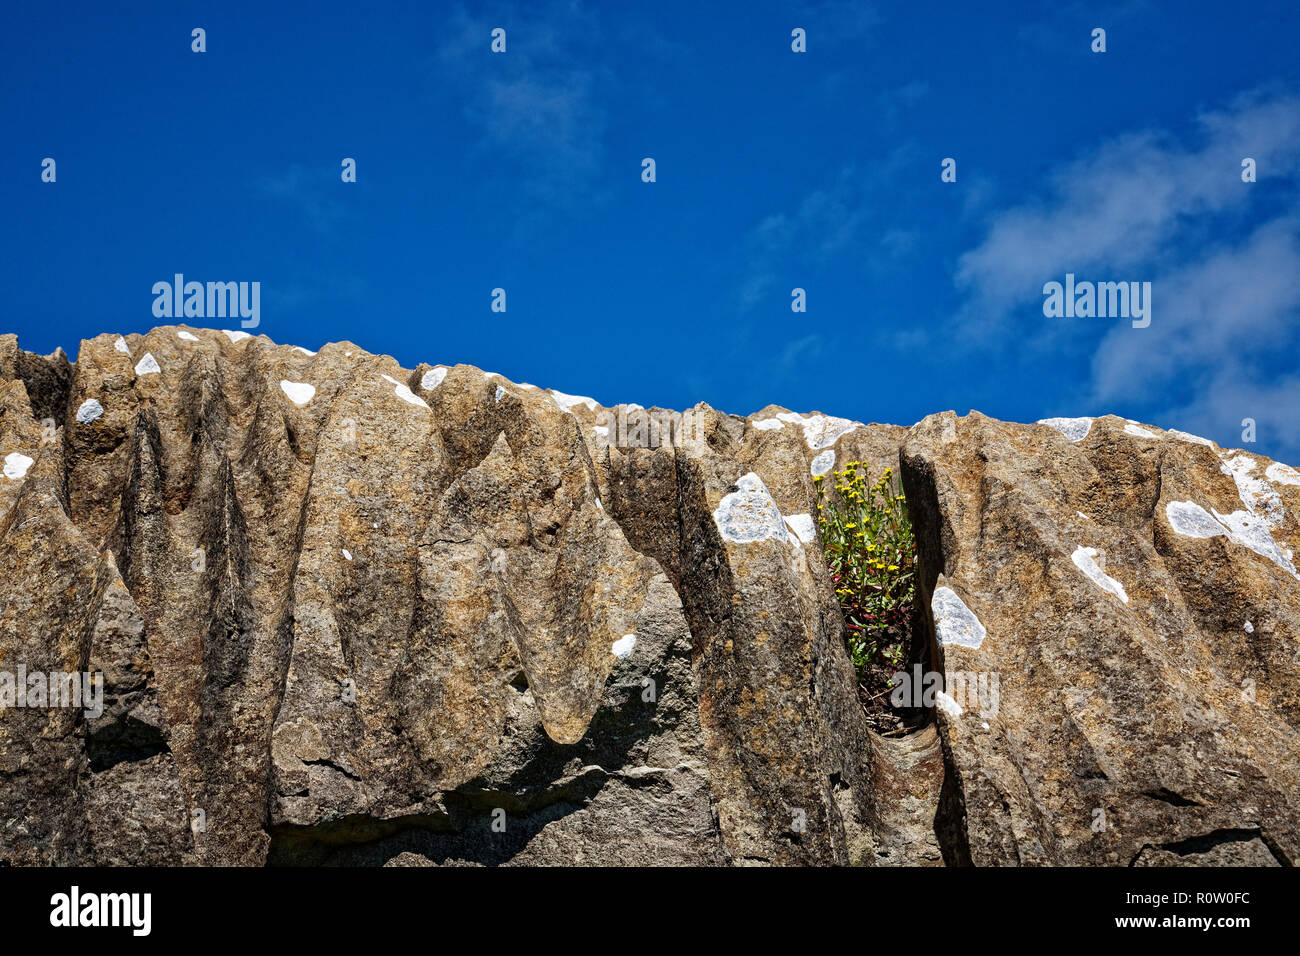 A small yellow flower eking out a living in a rock crevice on New Zealand's west coast Stock Photo